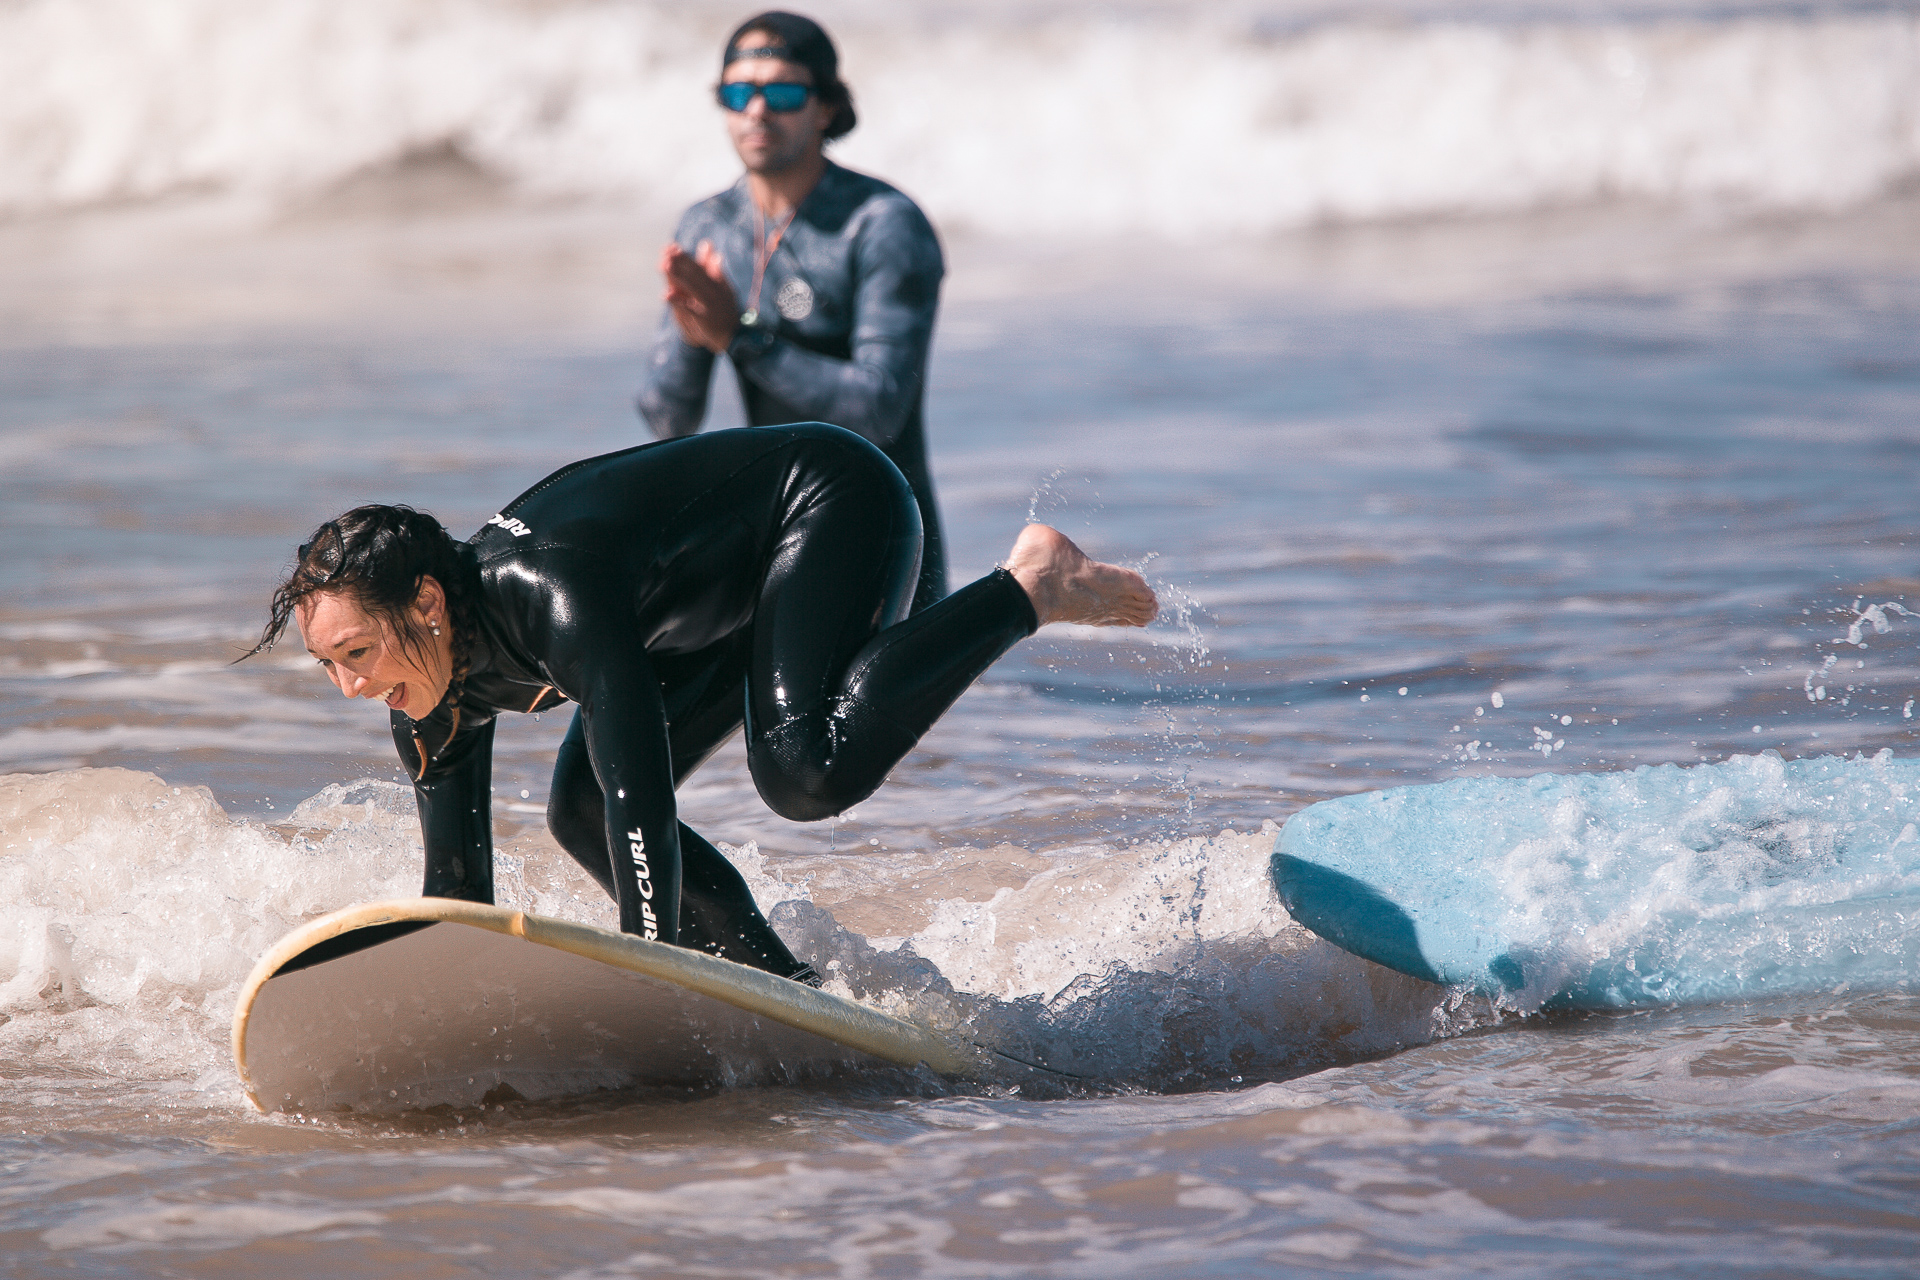 Beginners Guide To Surfing: Surf Etiquette